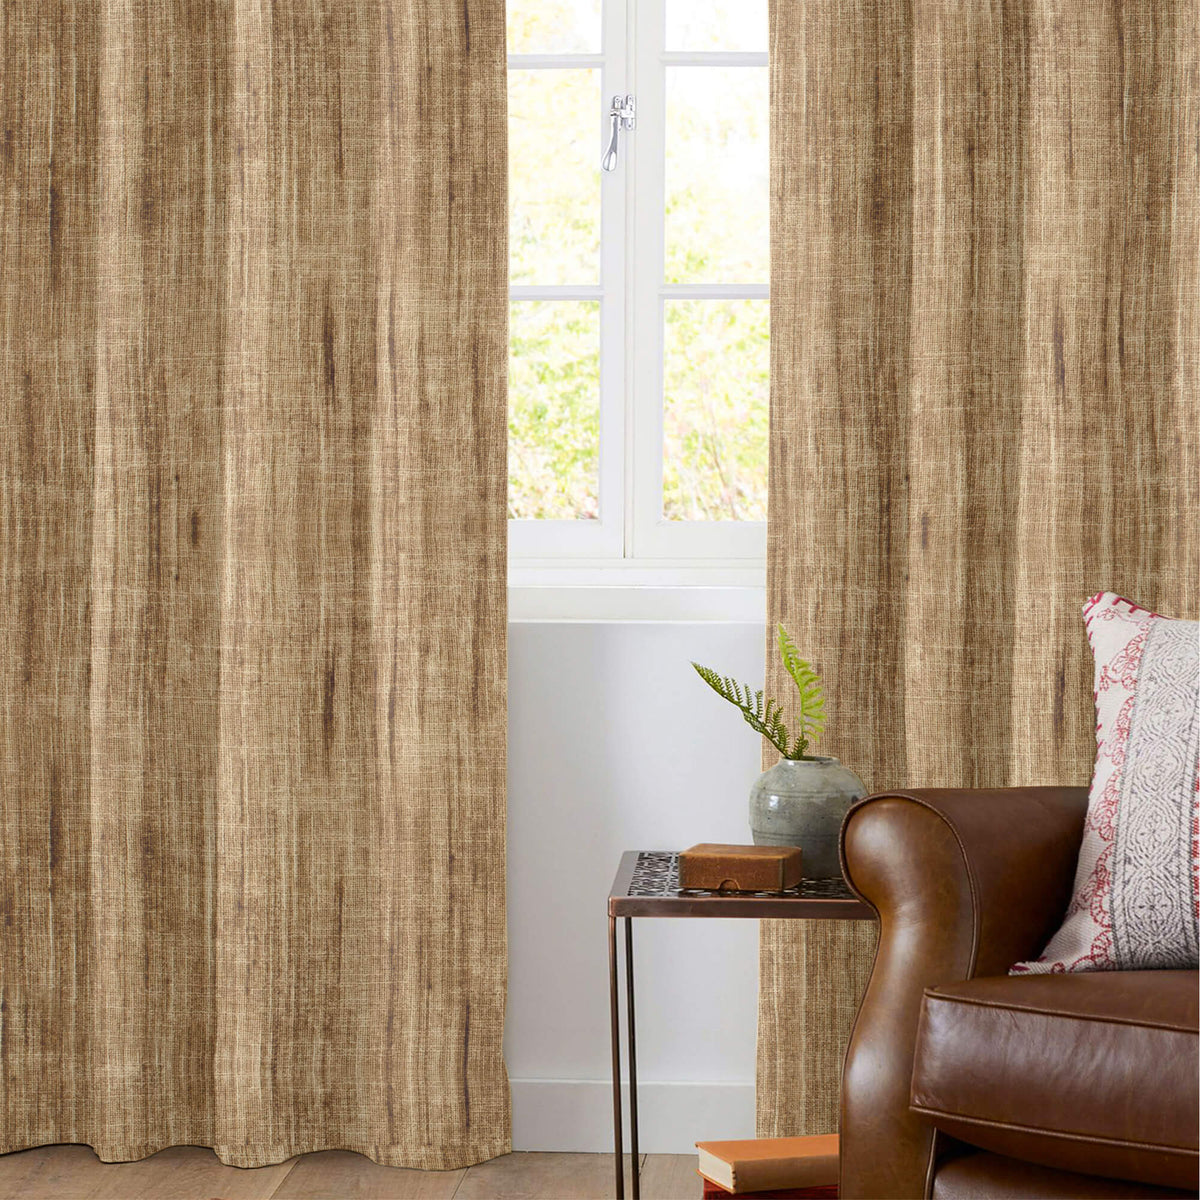 Tawny Brown Textured Premium Sheer Fabric (Width 54 Inches)